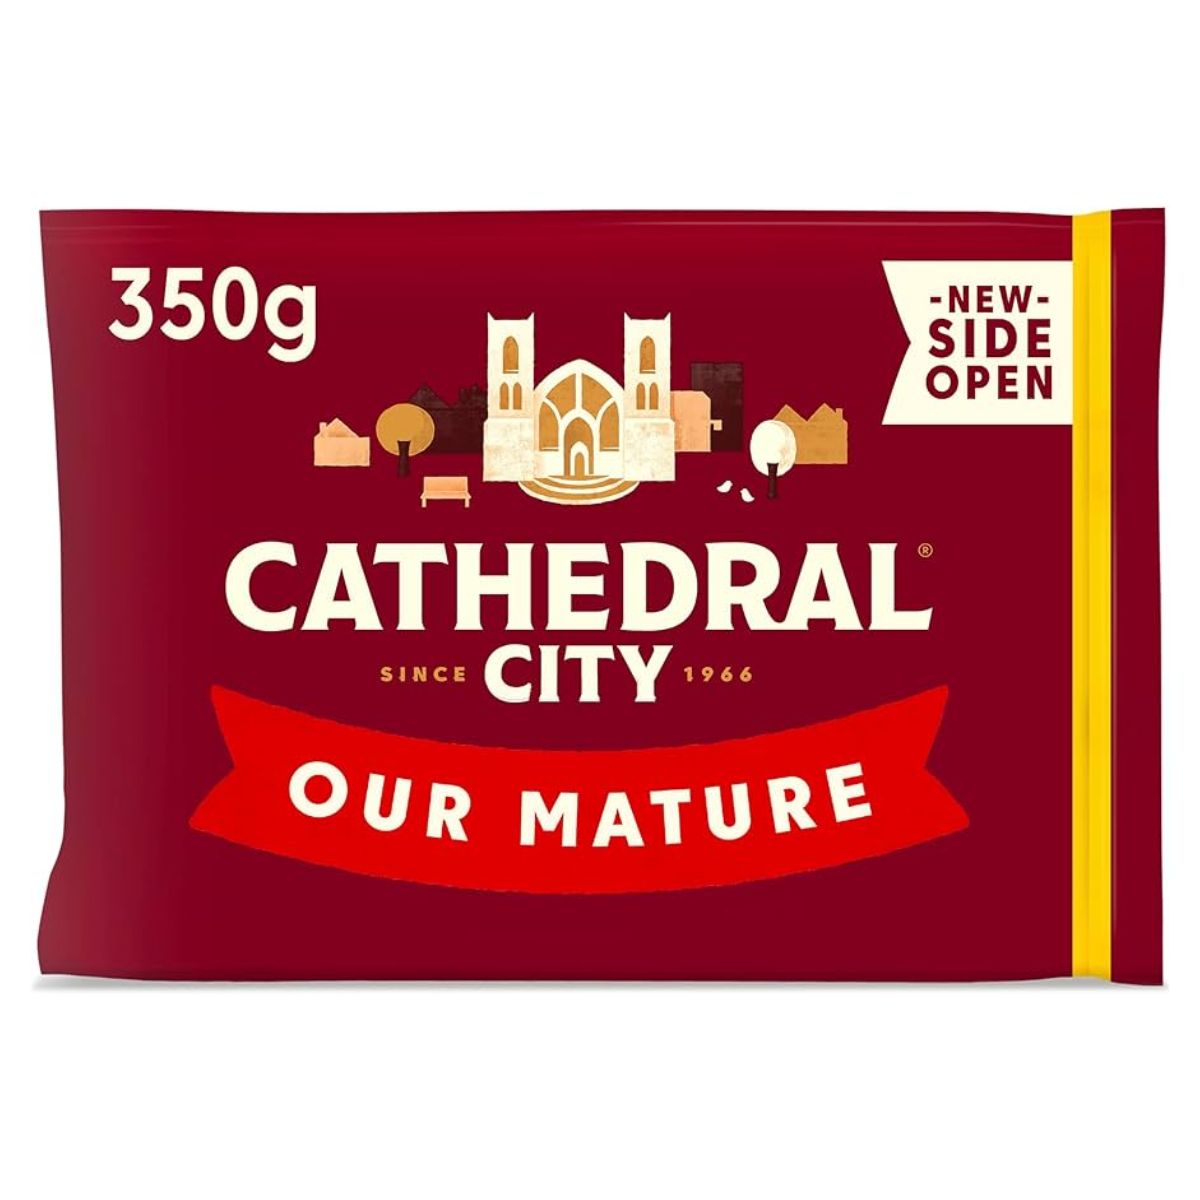 Cathedral City - Mature Cheddar - 350g.